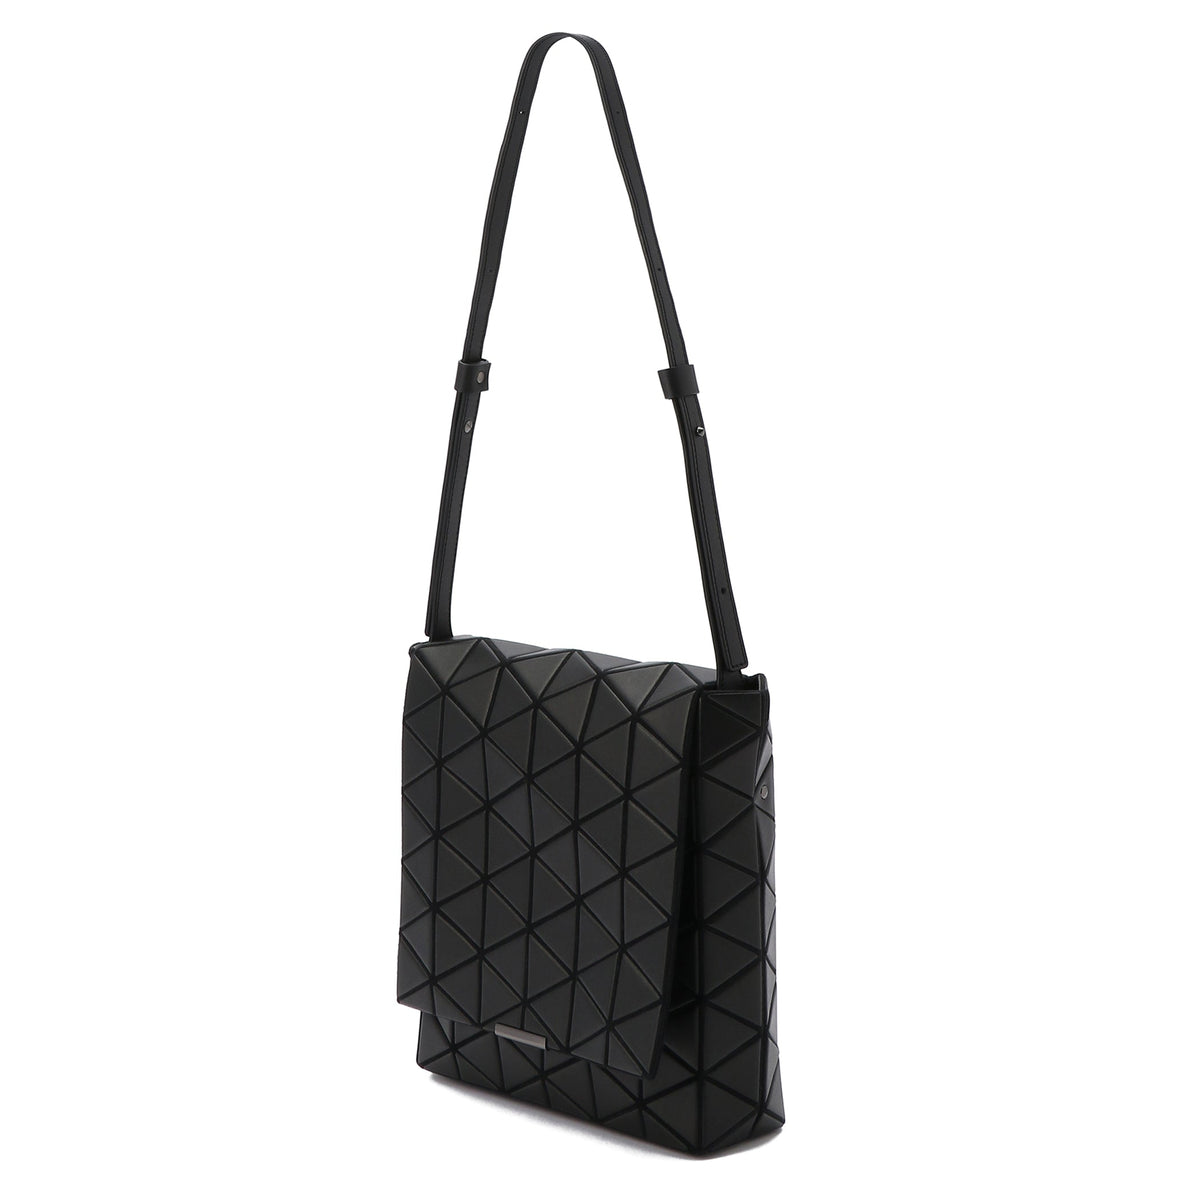 FLAP SHOULDER BAG | The official ISSEY MIYAKE ONLINE STORE